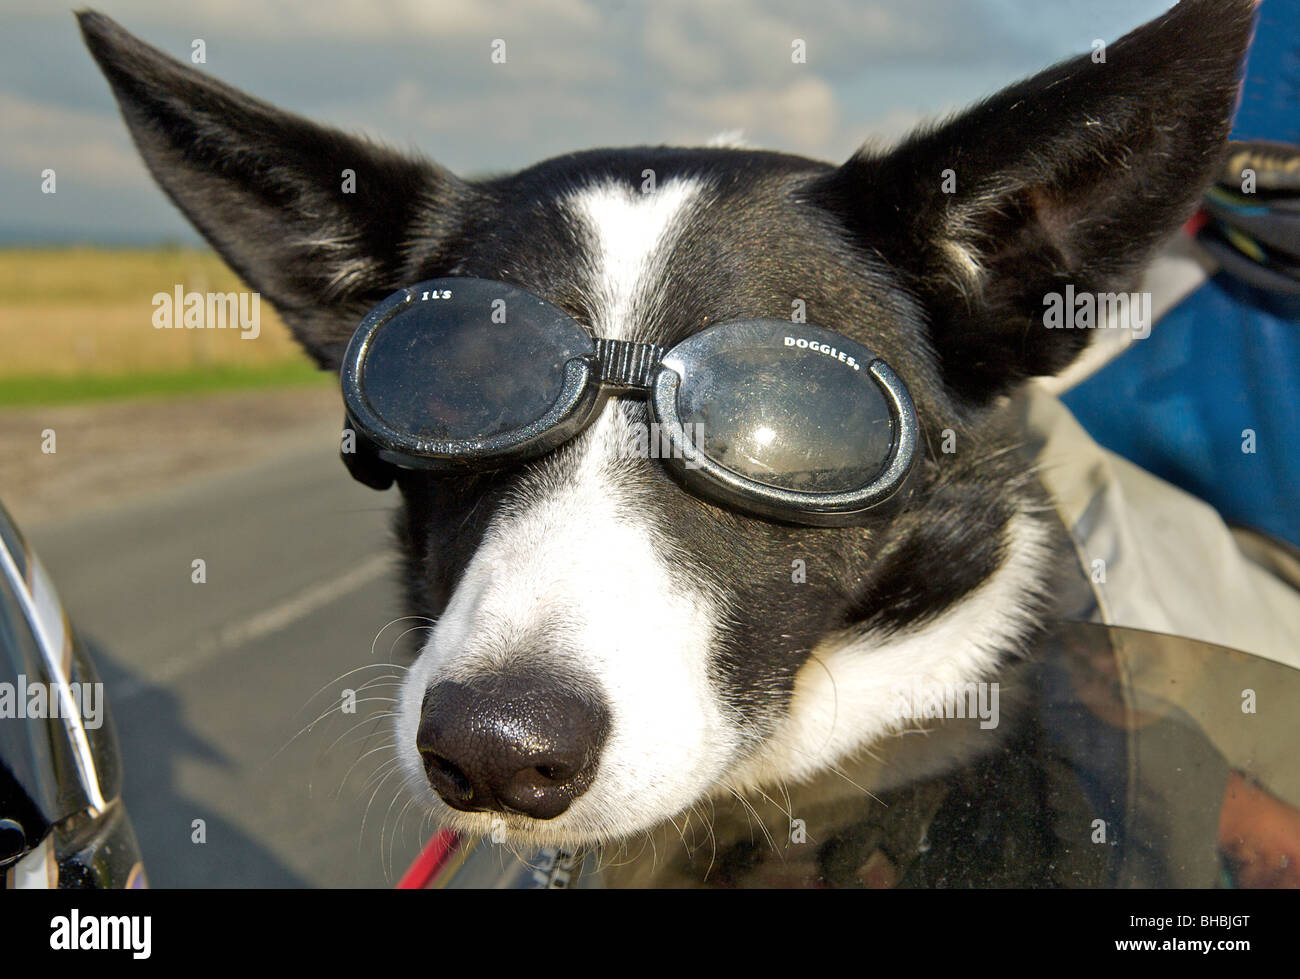 Collie dog wearing Doggles goggles Stock Photo